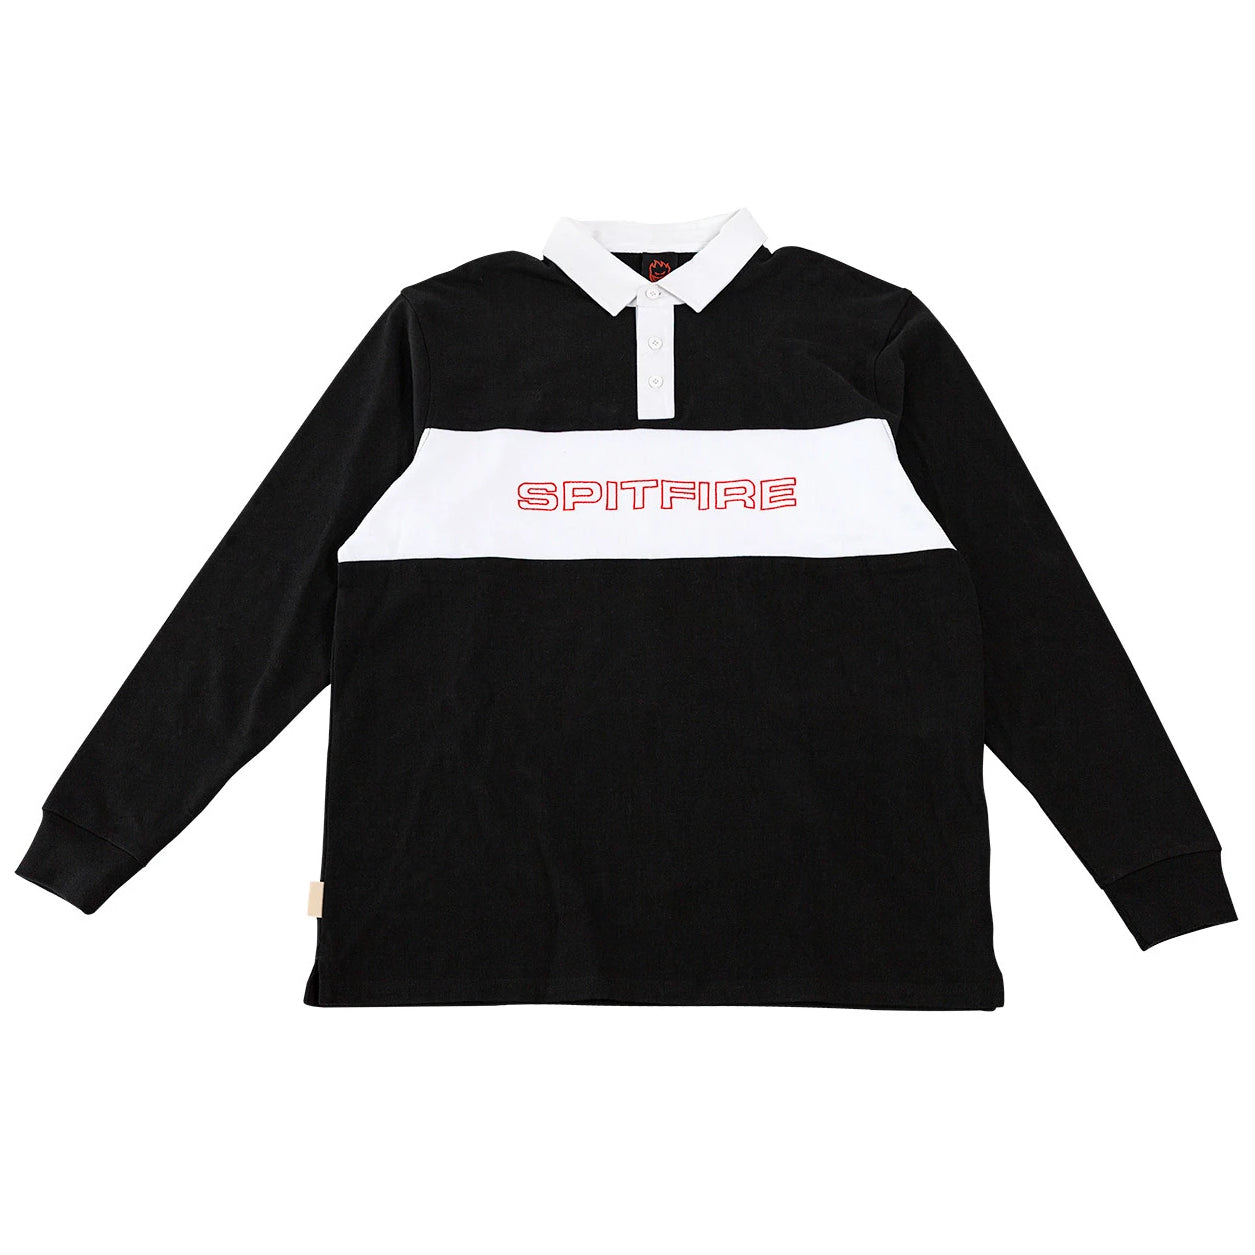 Black Geary Spitfire Wheels Rugby Shirt